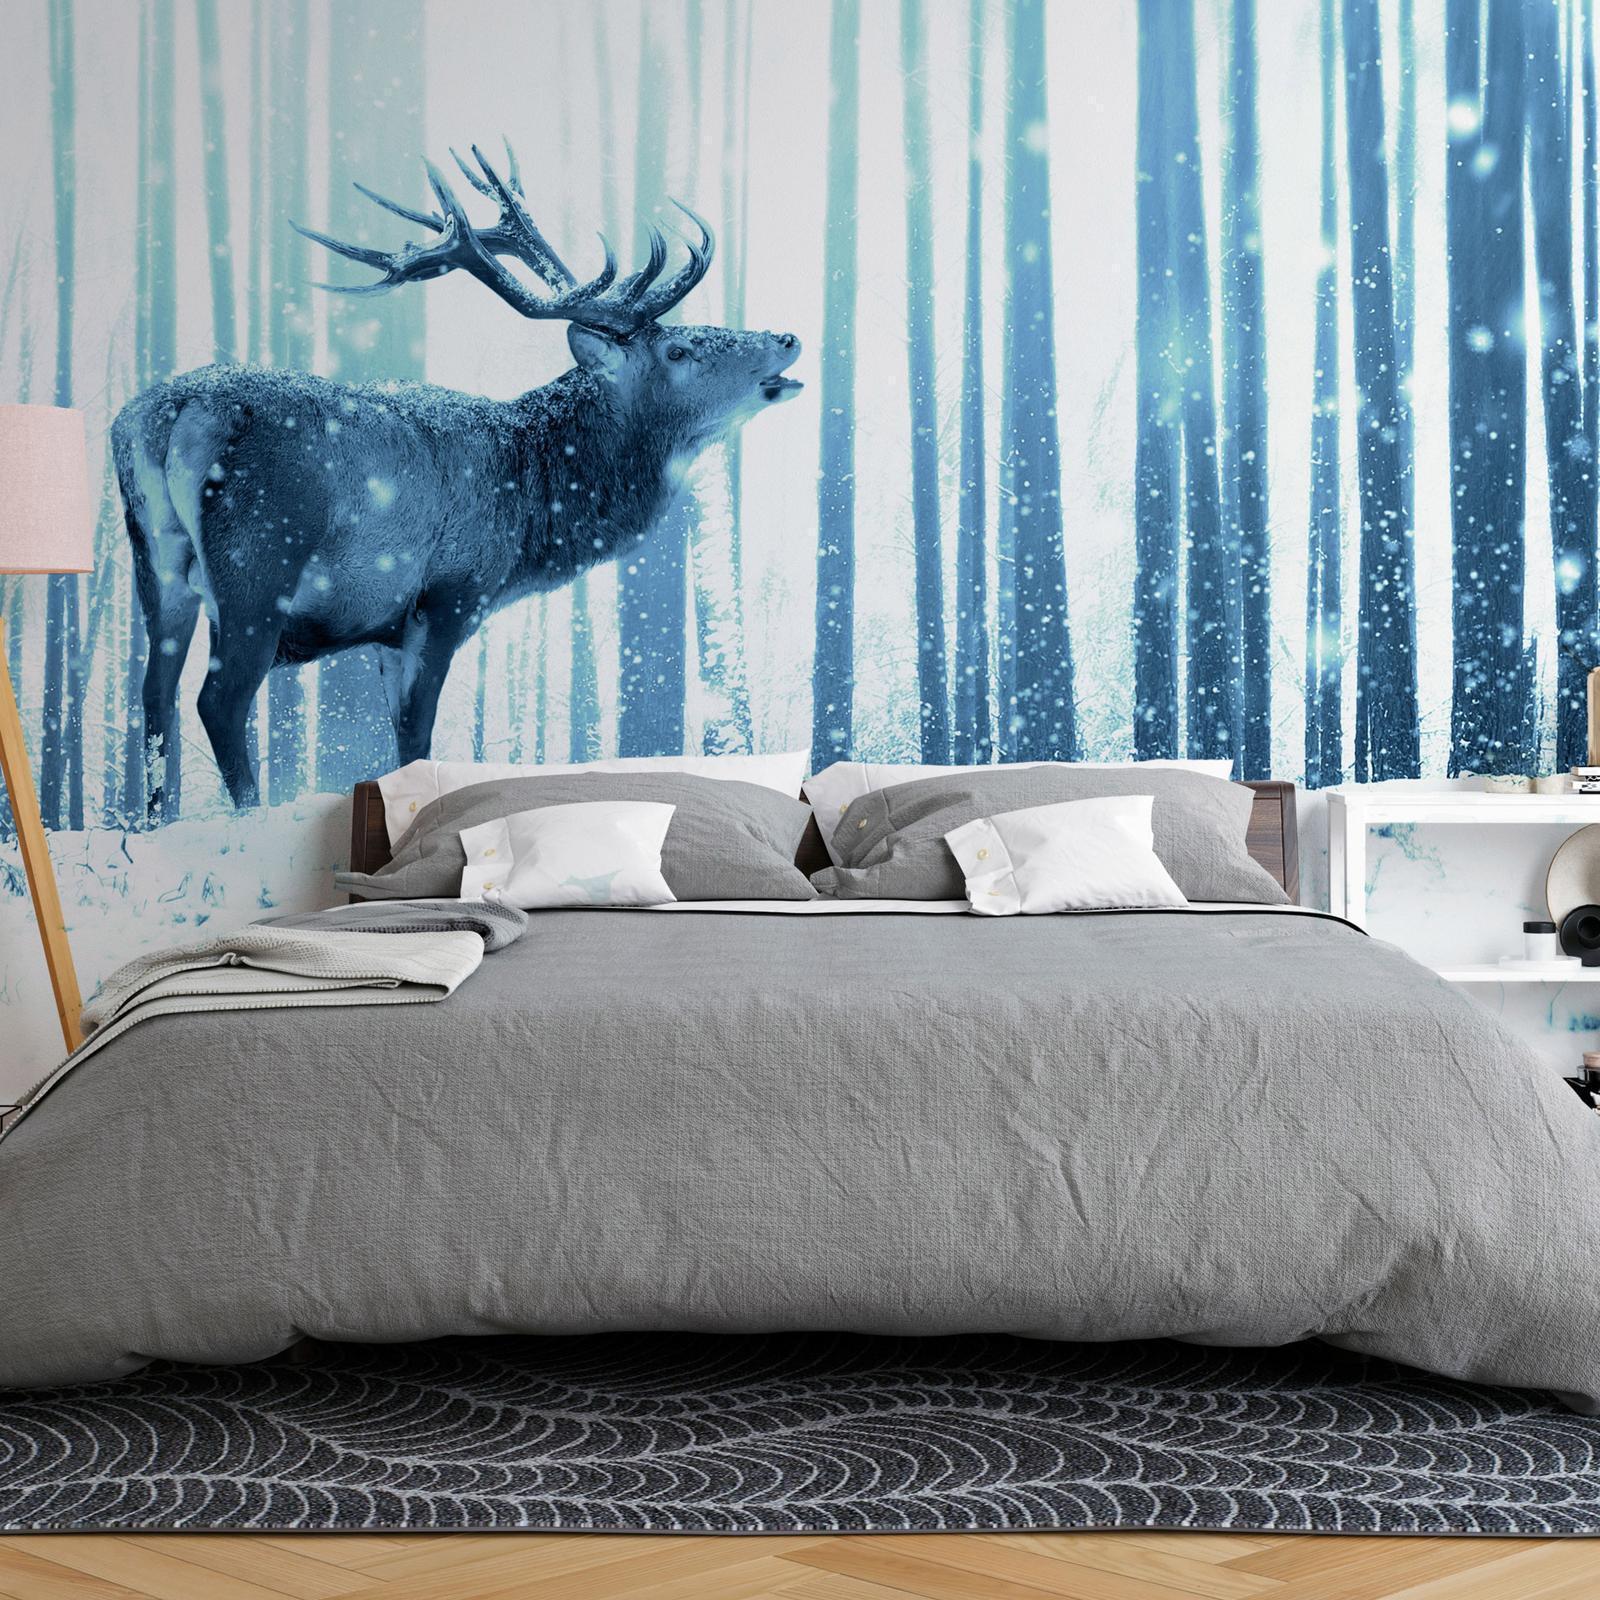 Papier peint - Winter animals - deer motif on a forest background in shades of blue